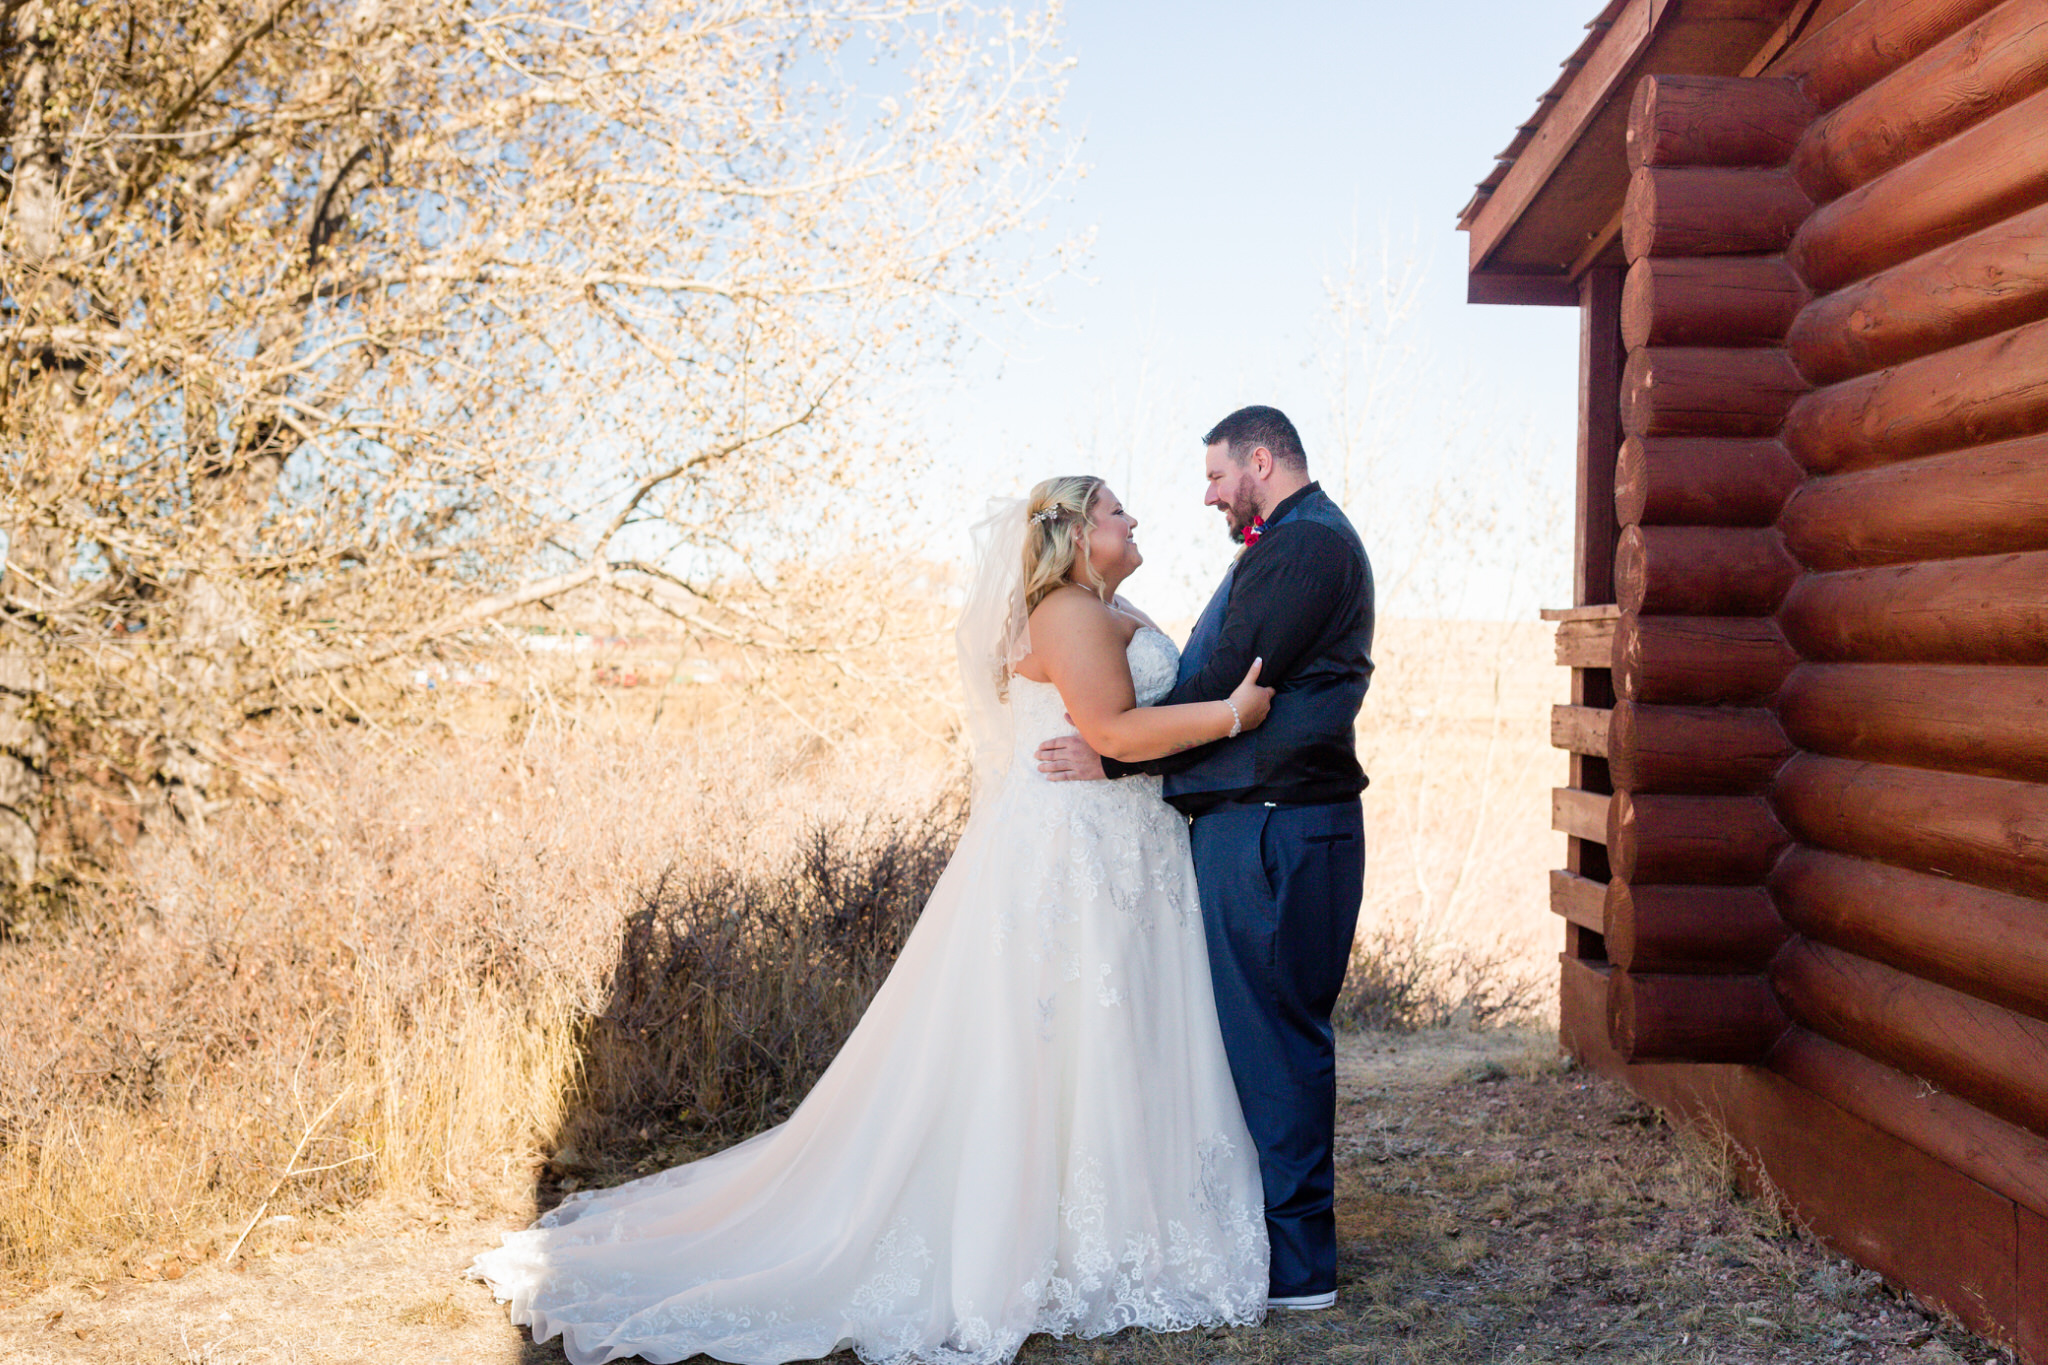 The couple embracing for some portraits after their first look. Briana and Kevin's Terry Bison Ranch Wedding by Wyoming Wedding Photographer Jennifer Garza, Wyoming Wedding, Wyoming Wedding Photographer, Wyoming Engagement Photographer, Wyoming Bride, Couples Goals, Wyoming Wedding, Wedding Photographer, Wyoming Photographer, Wyoming Wedding Photography, Wedding Inspiration, Destination Wedding Photographer, Fall Wedding, Ranch Wedding, Rustic Wedding Inspiration, Wedding Dress Inspo